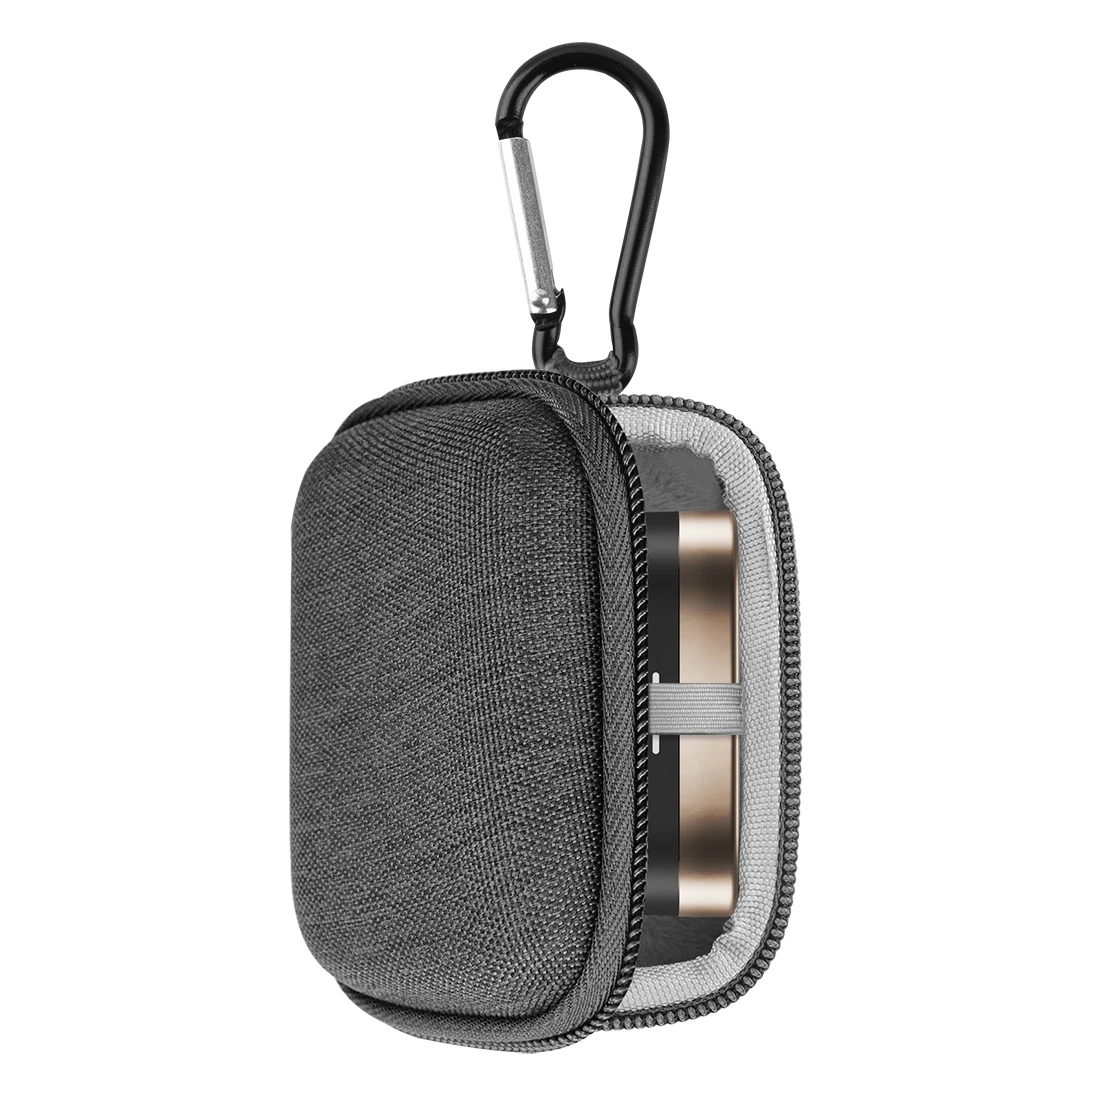 Geekria Headphones Case Pouch For Bowers&Wilkins PI7 PI5 in-